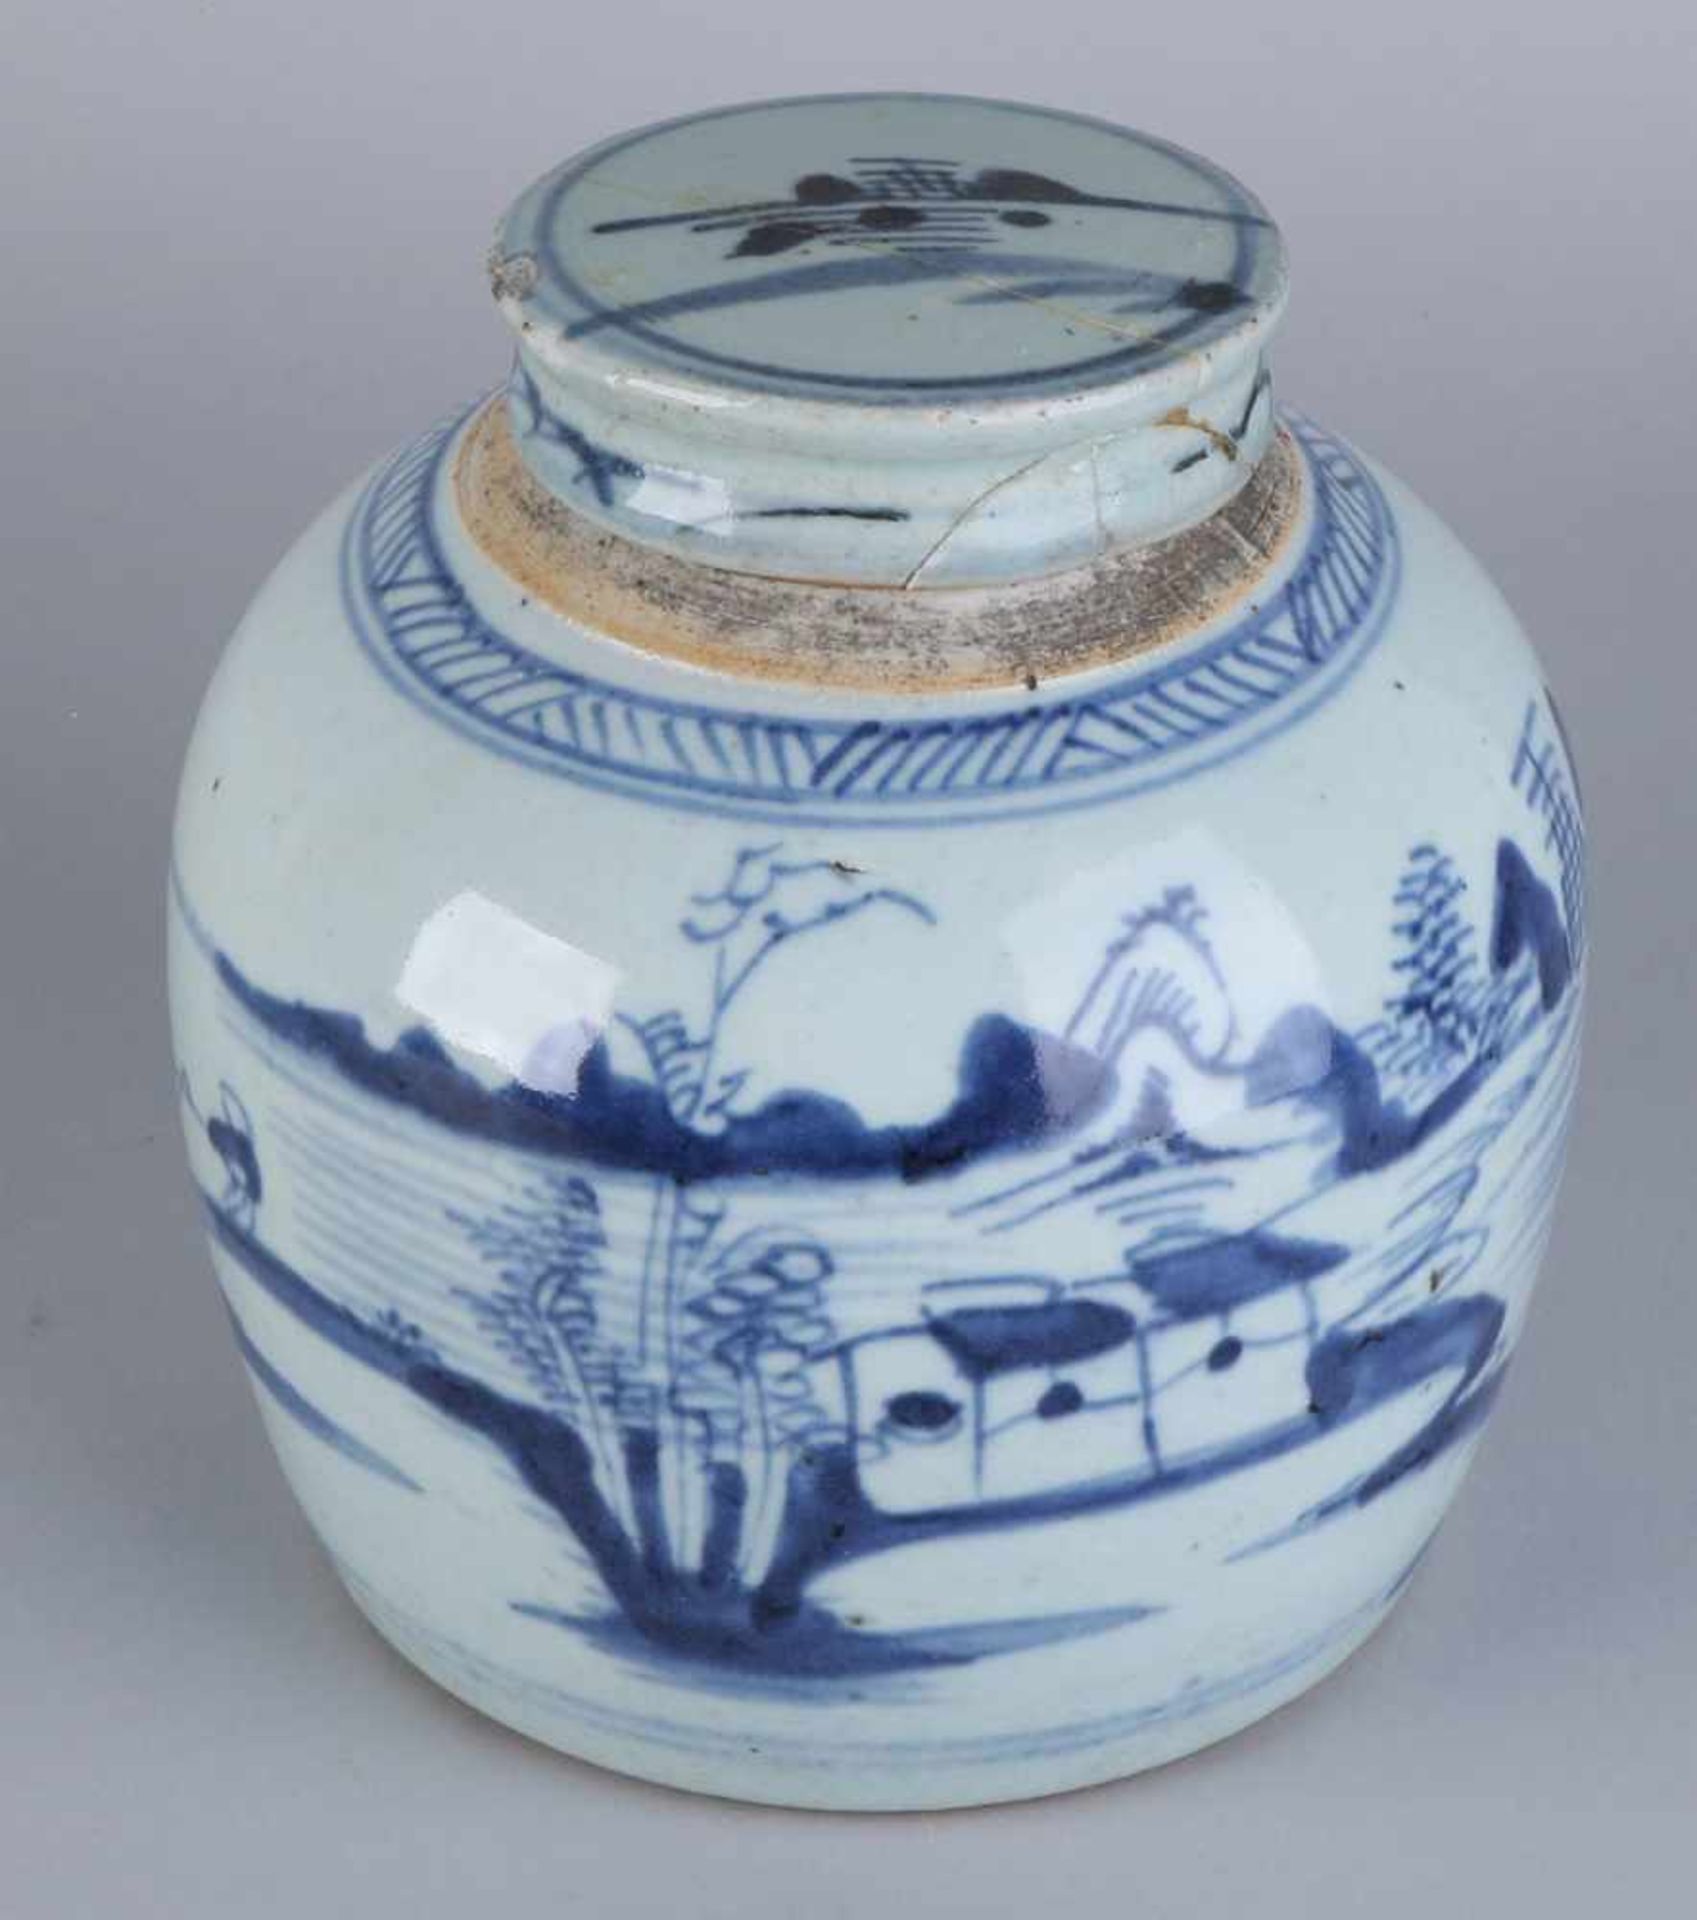 18th Century Chinese porcelain large ginger jar with seascape. Glued cover. Dimensions: 19 x 17 x